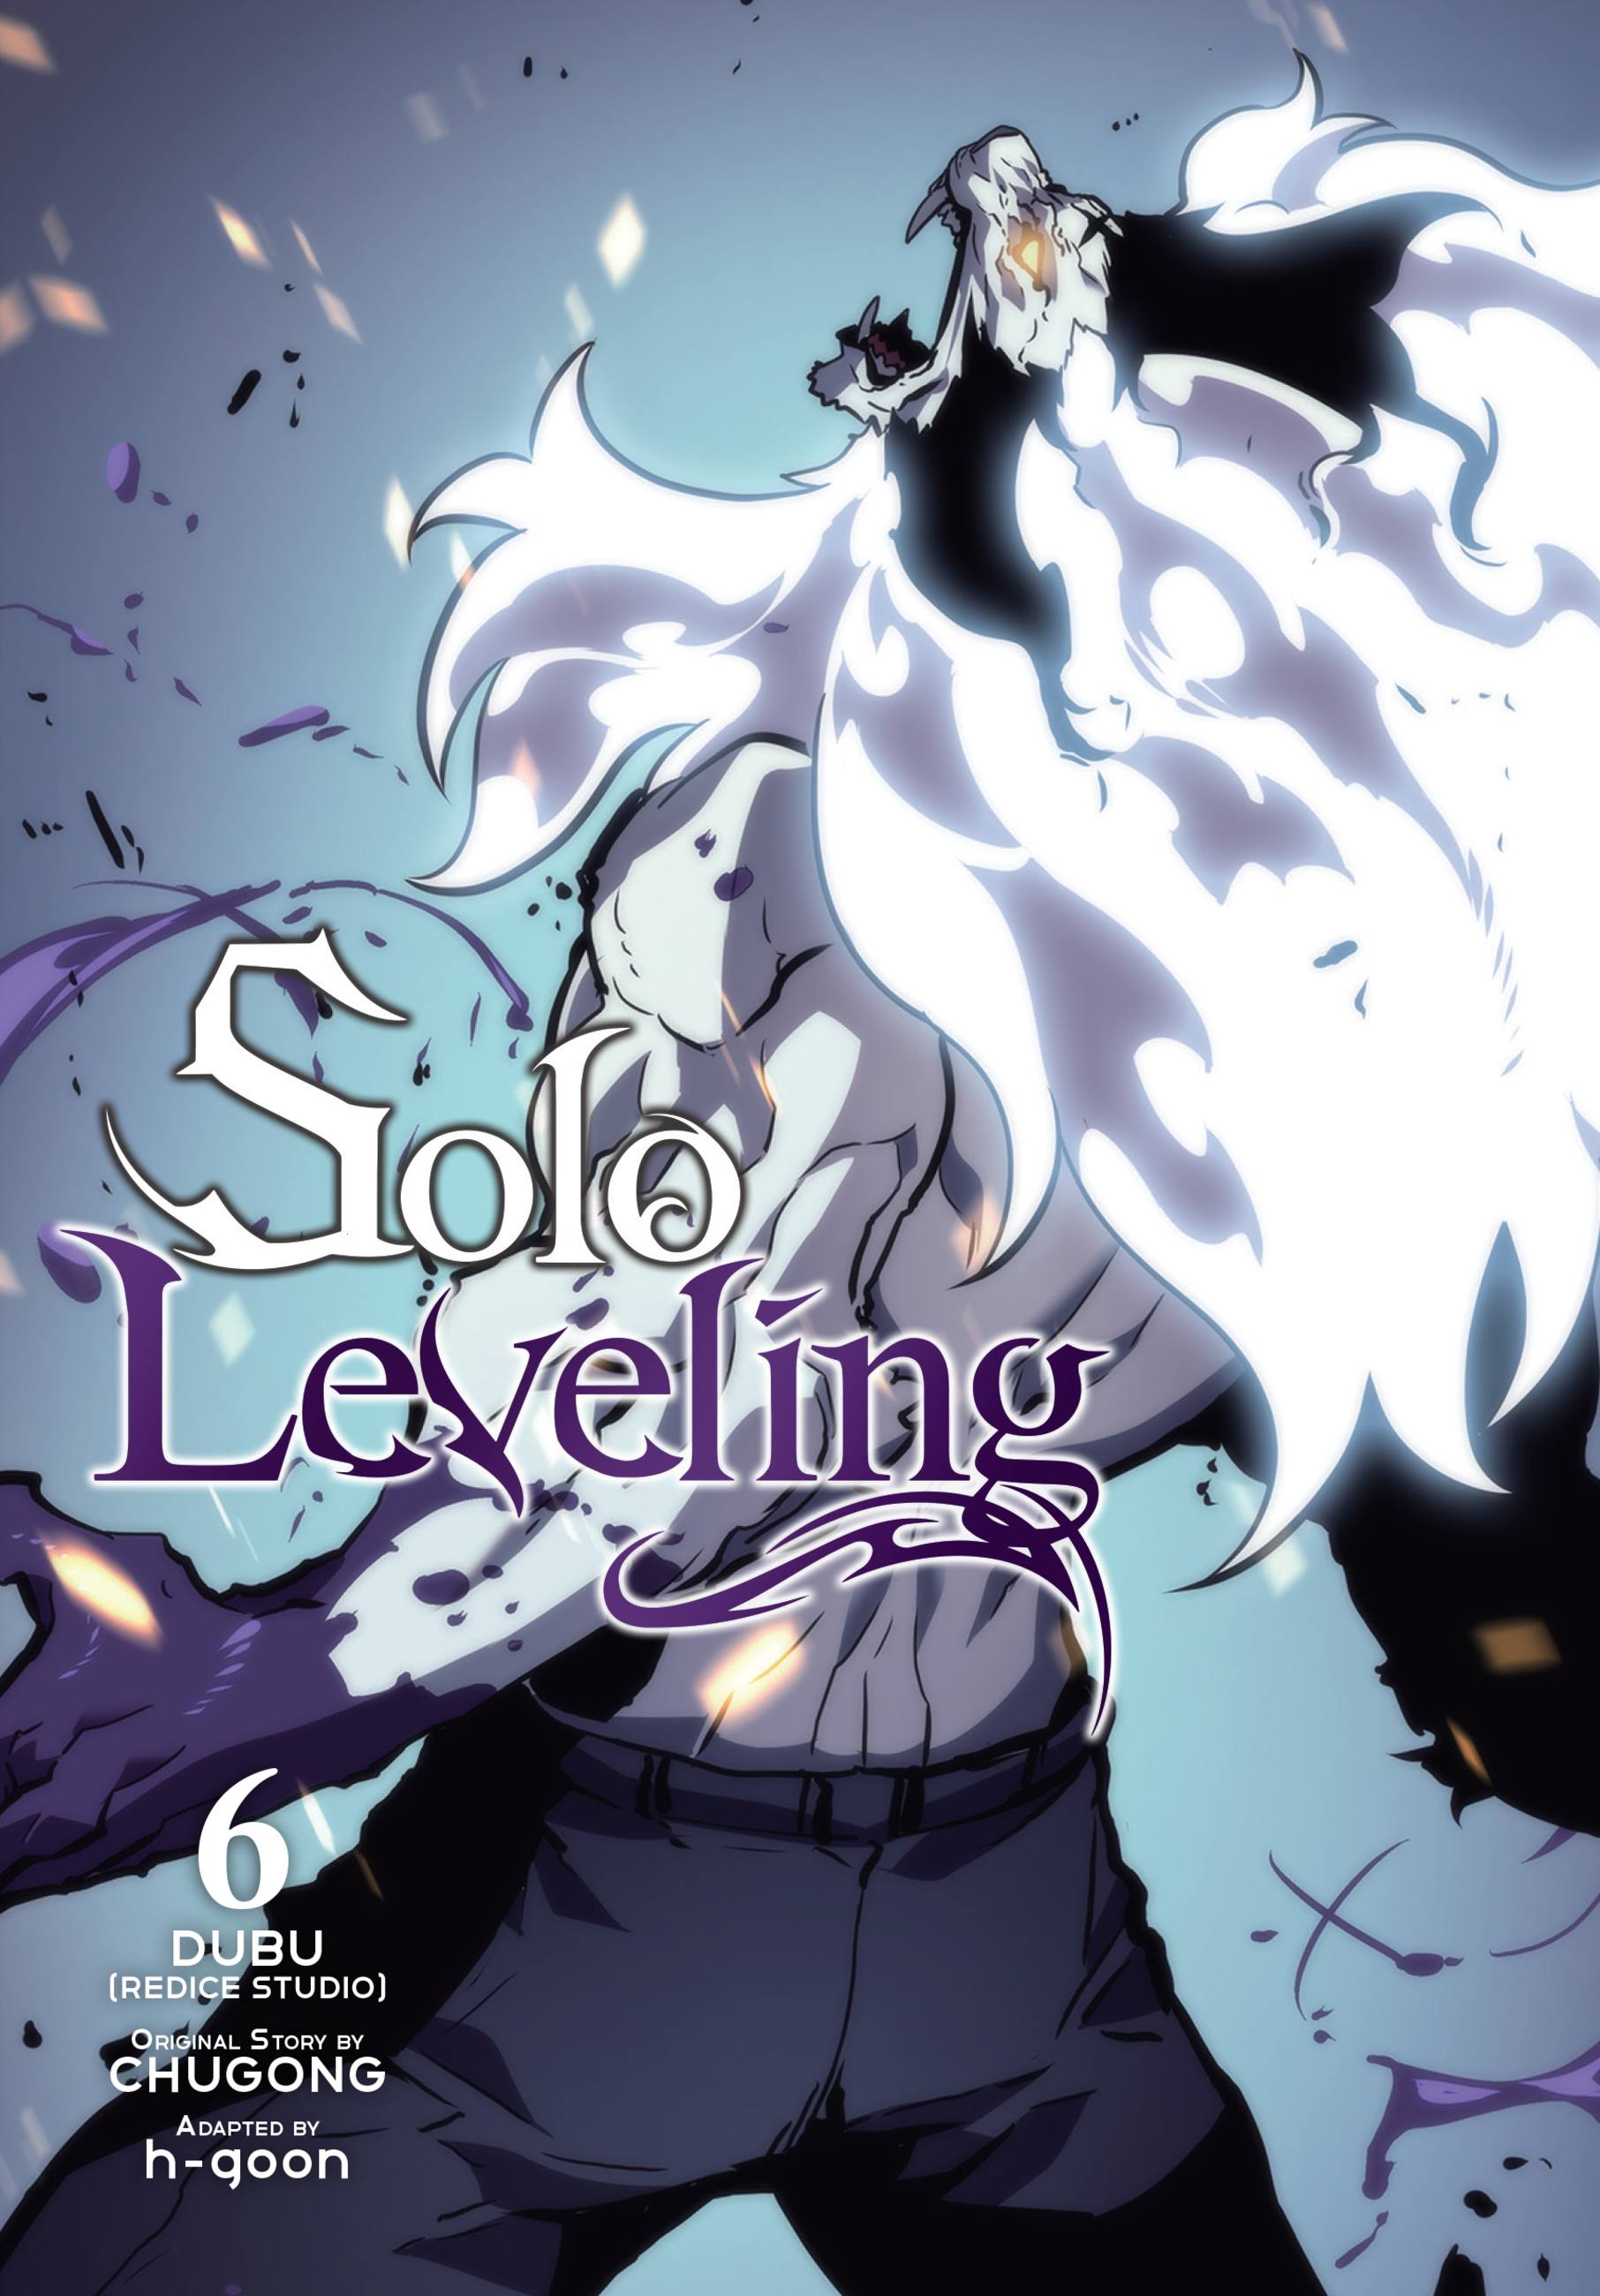 Solo Leveling Vol.6 | Chugong